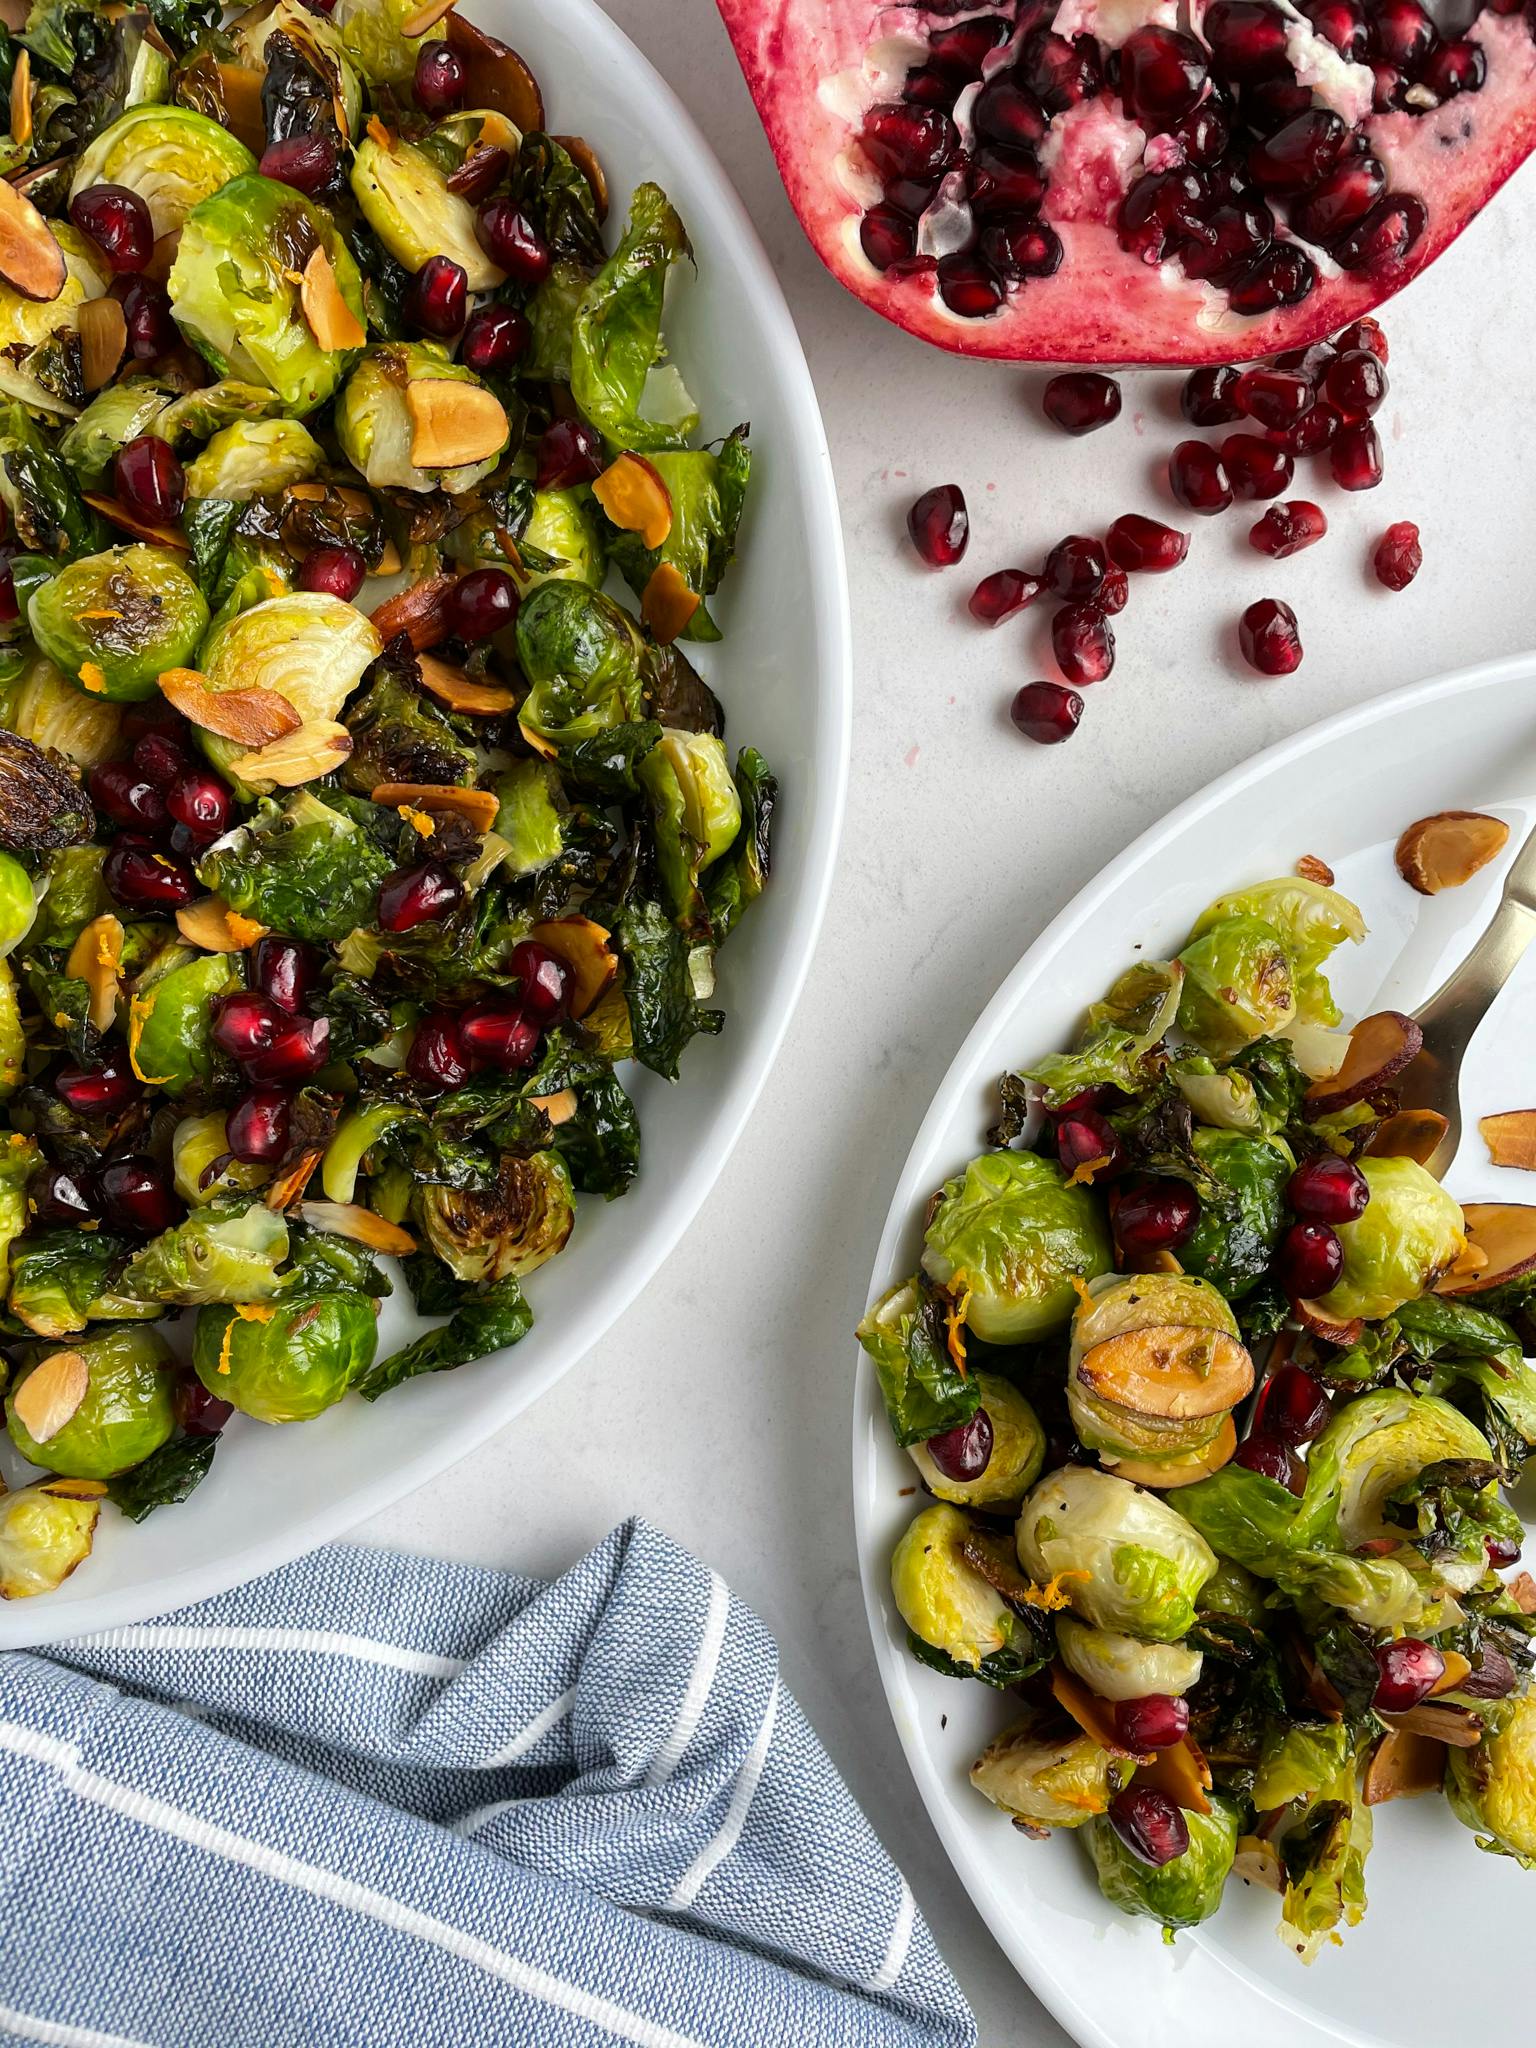 Brussels sprouts on a white plate next to a pomegranate.